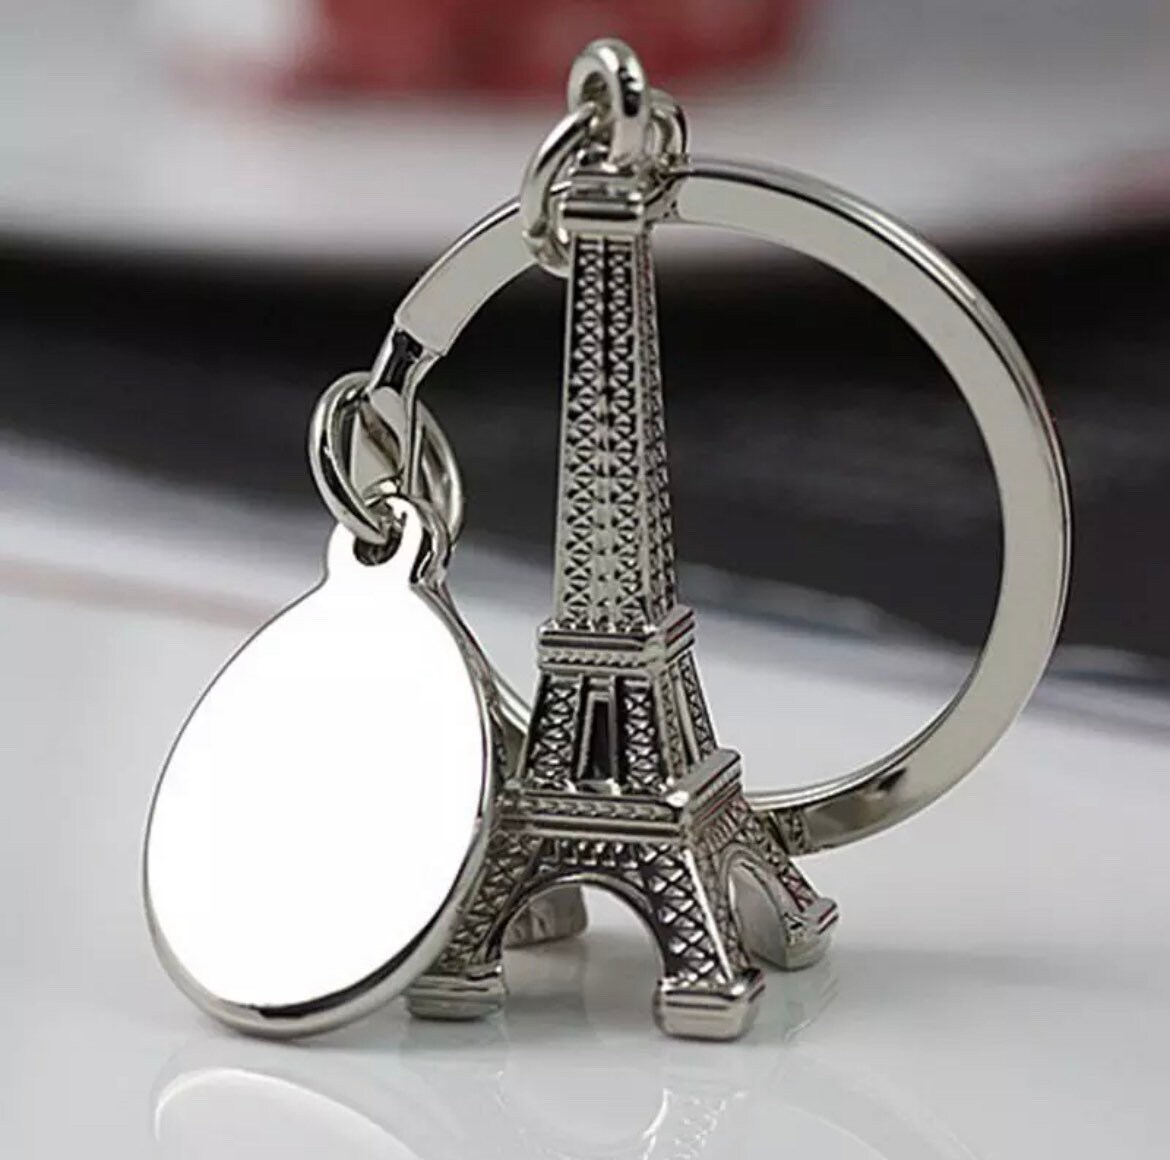 Juvale 6 Pack Paris Keychain, France Souvenir Gift, Eiffel Tower, French  Flag, and Arc de Triomphe Metal Key Rings